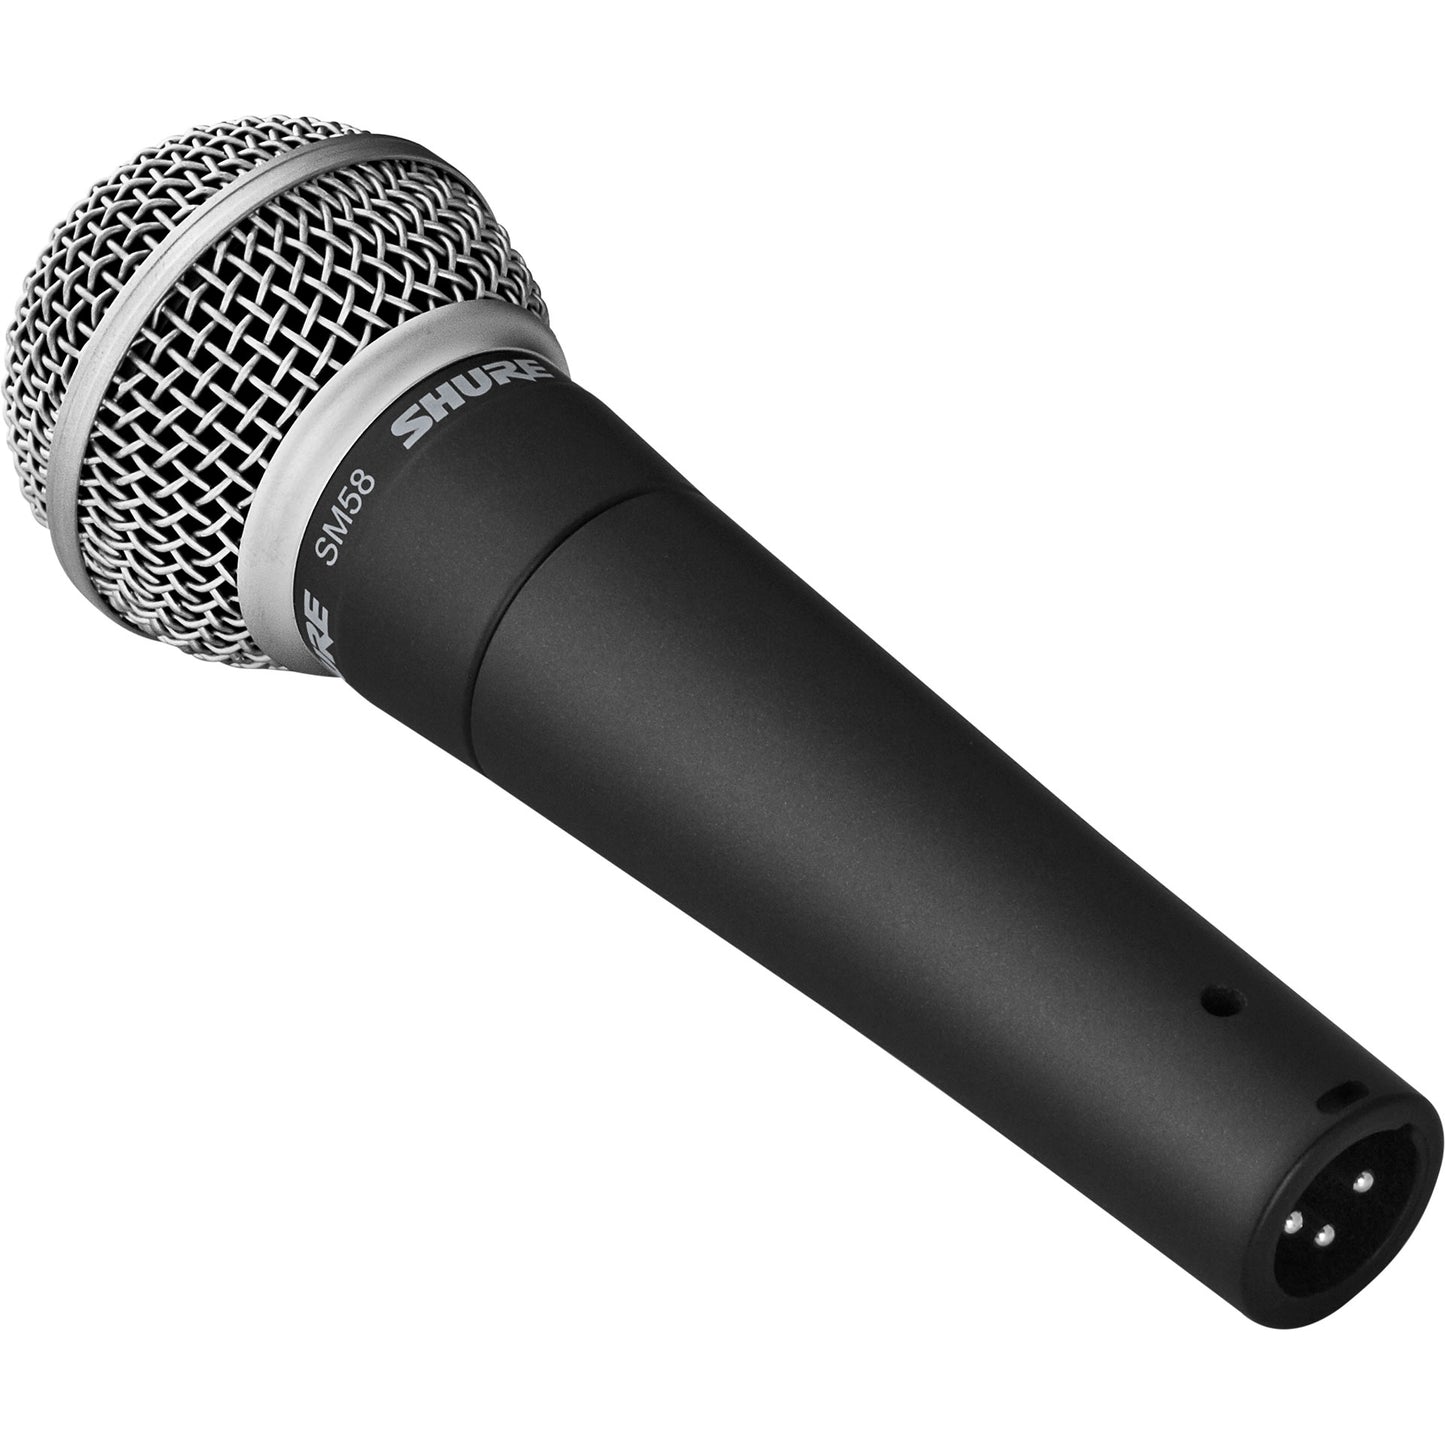 Shure SM58-CN Handheld Microphone with Cable